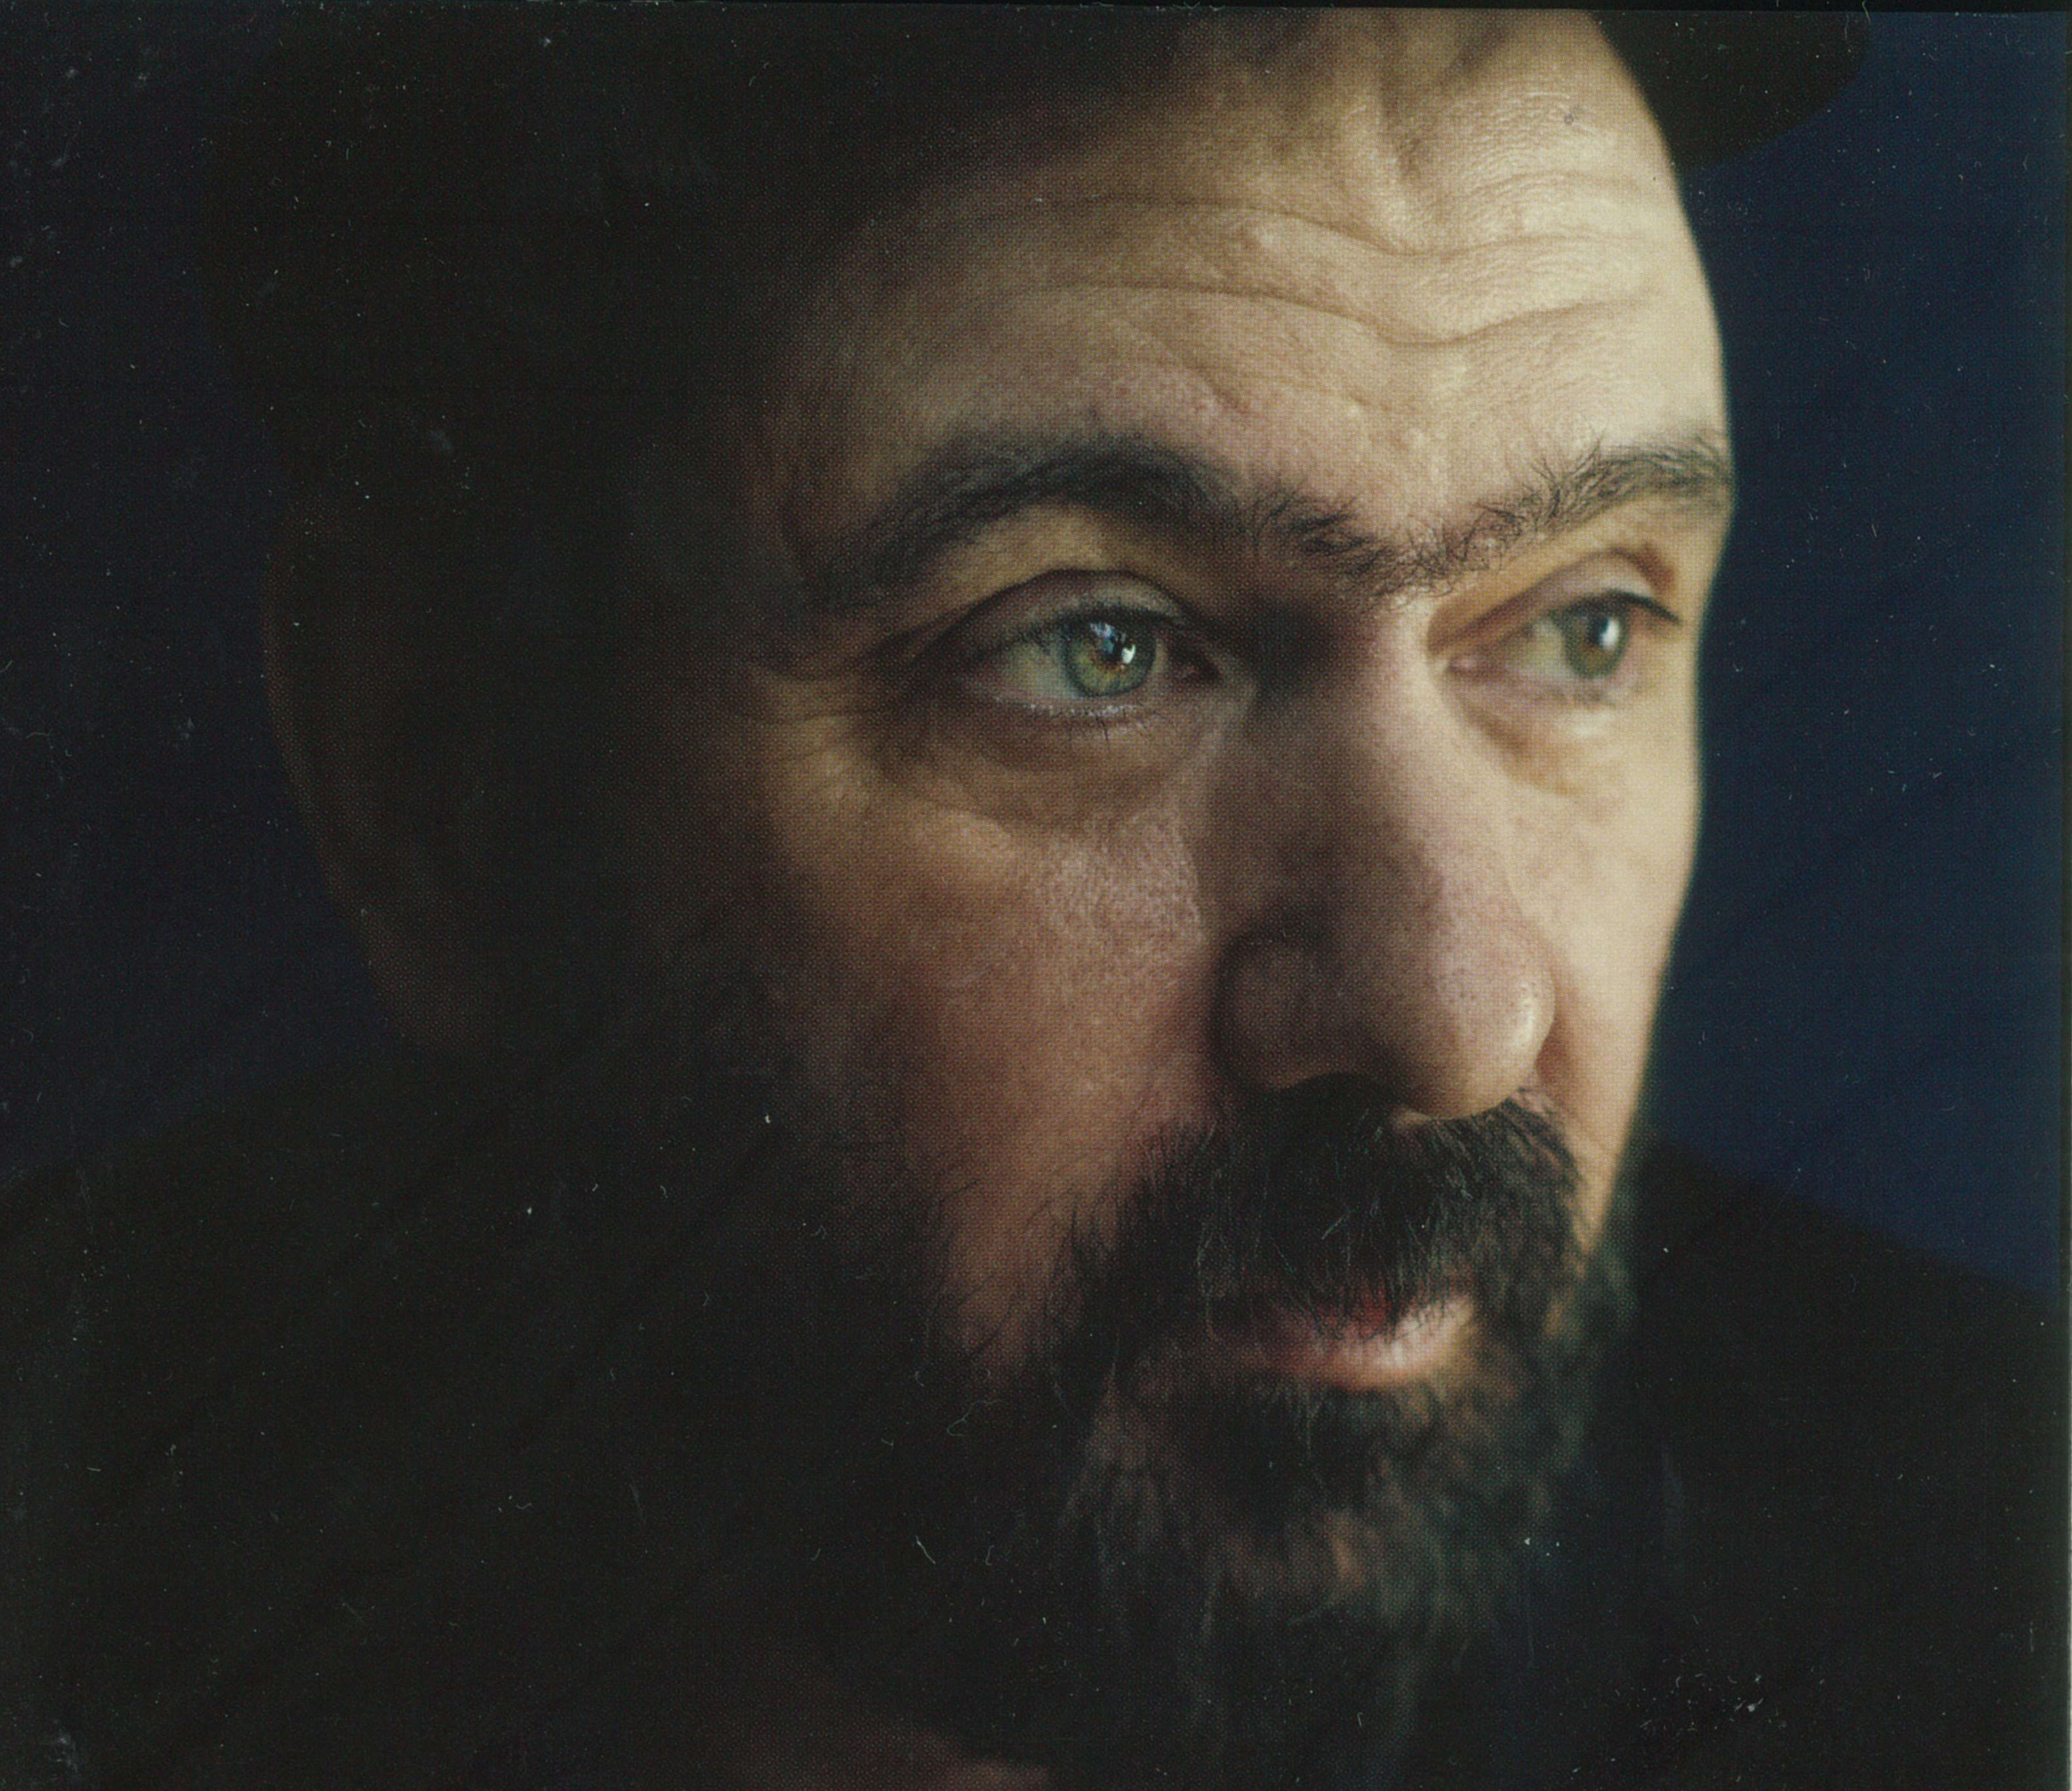 Mark Eitzel, from cover booklet of 'Hey, Mr Ferryman'